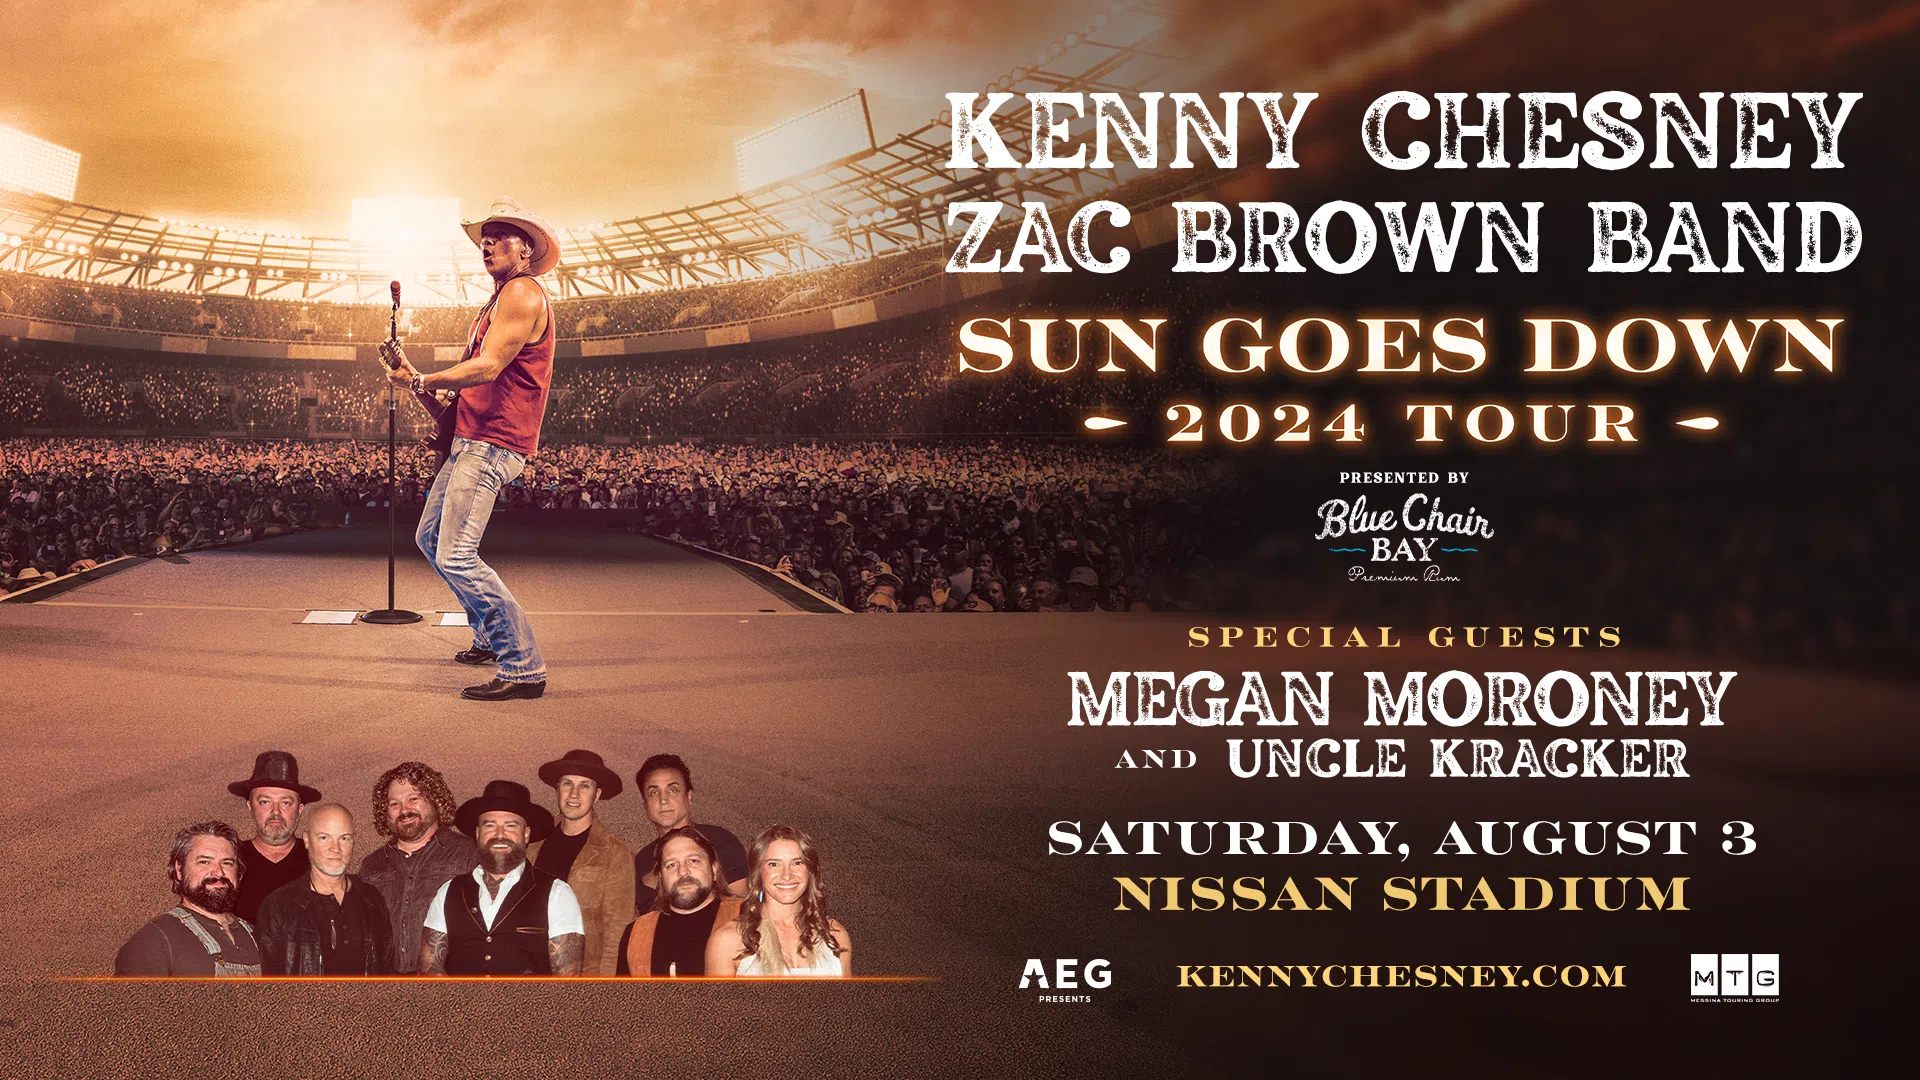 Kenny Chesney and Zach Brown Band Sun Goes Down Tour 2024!